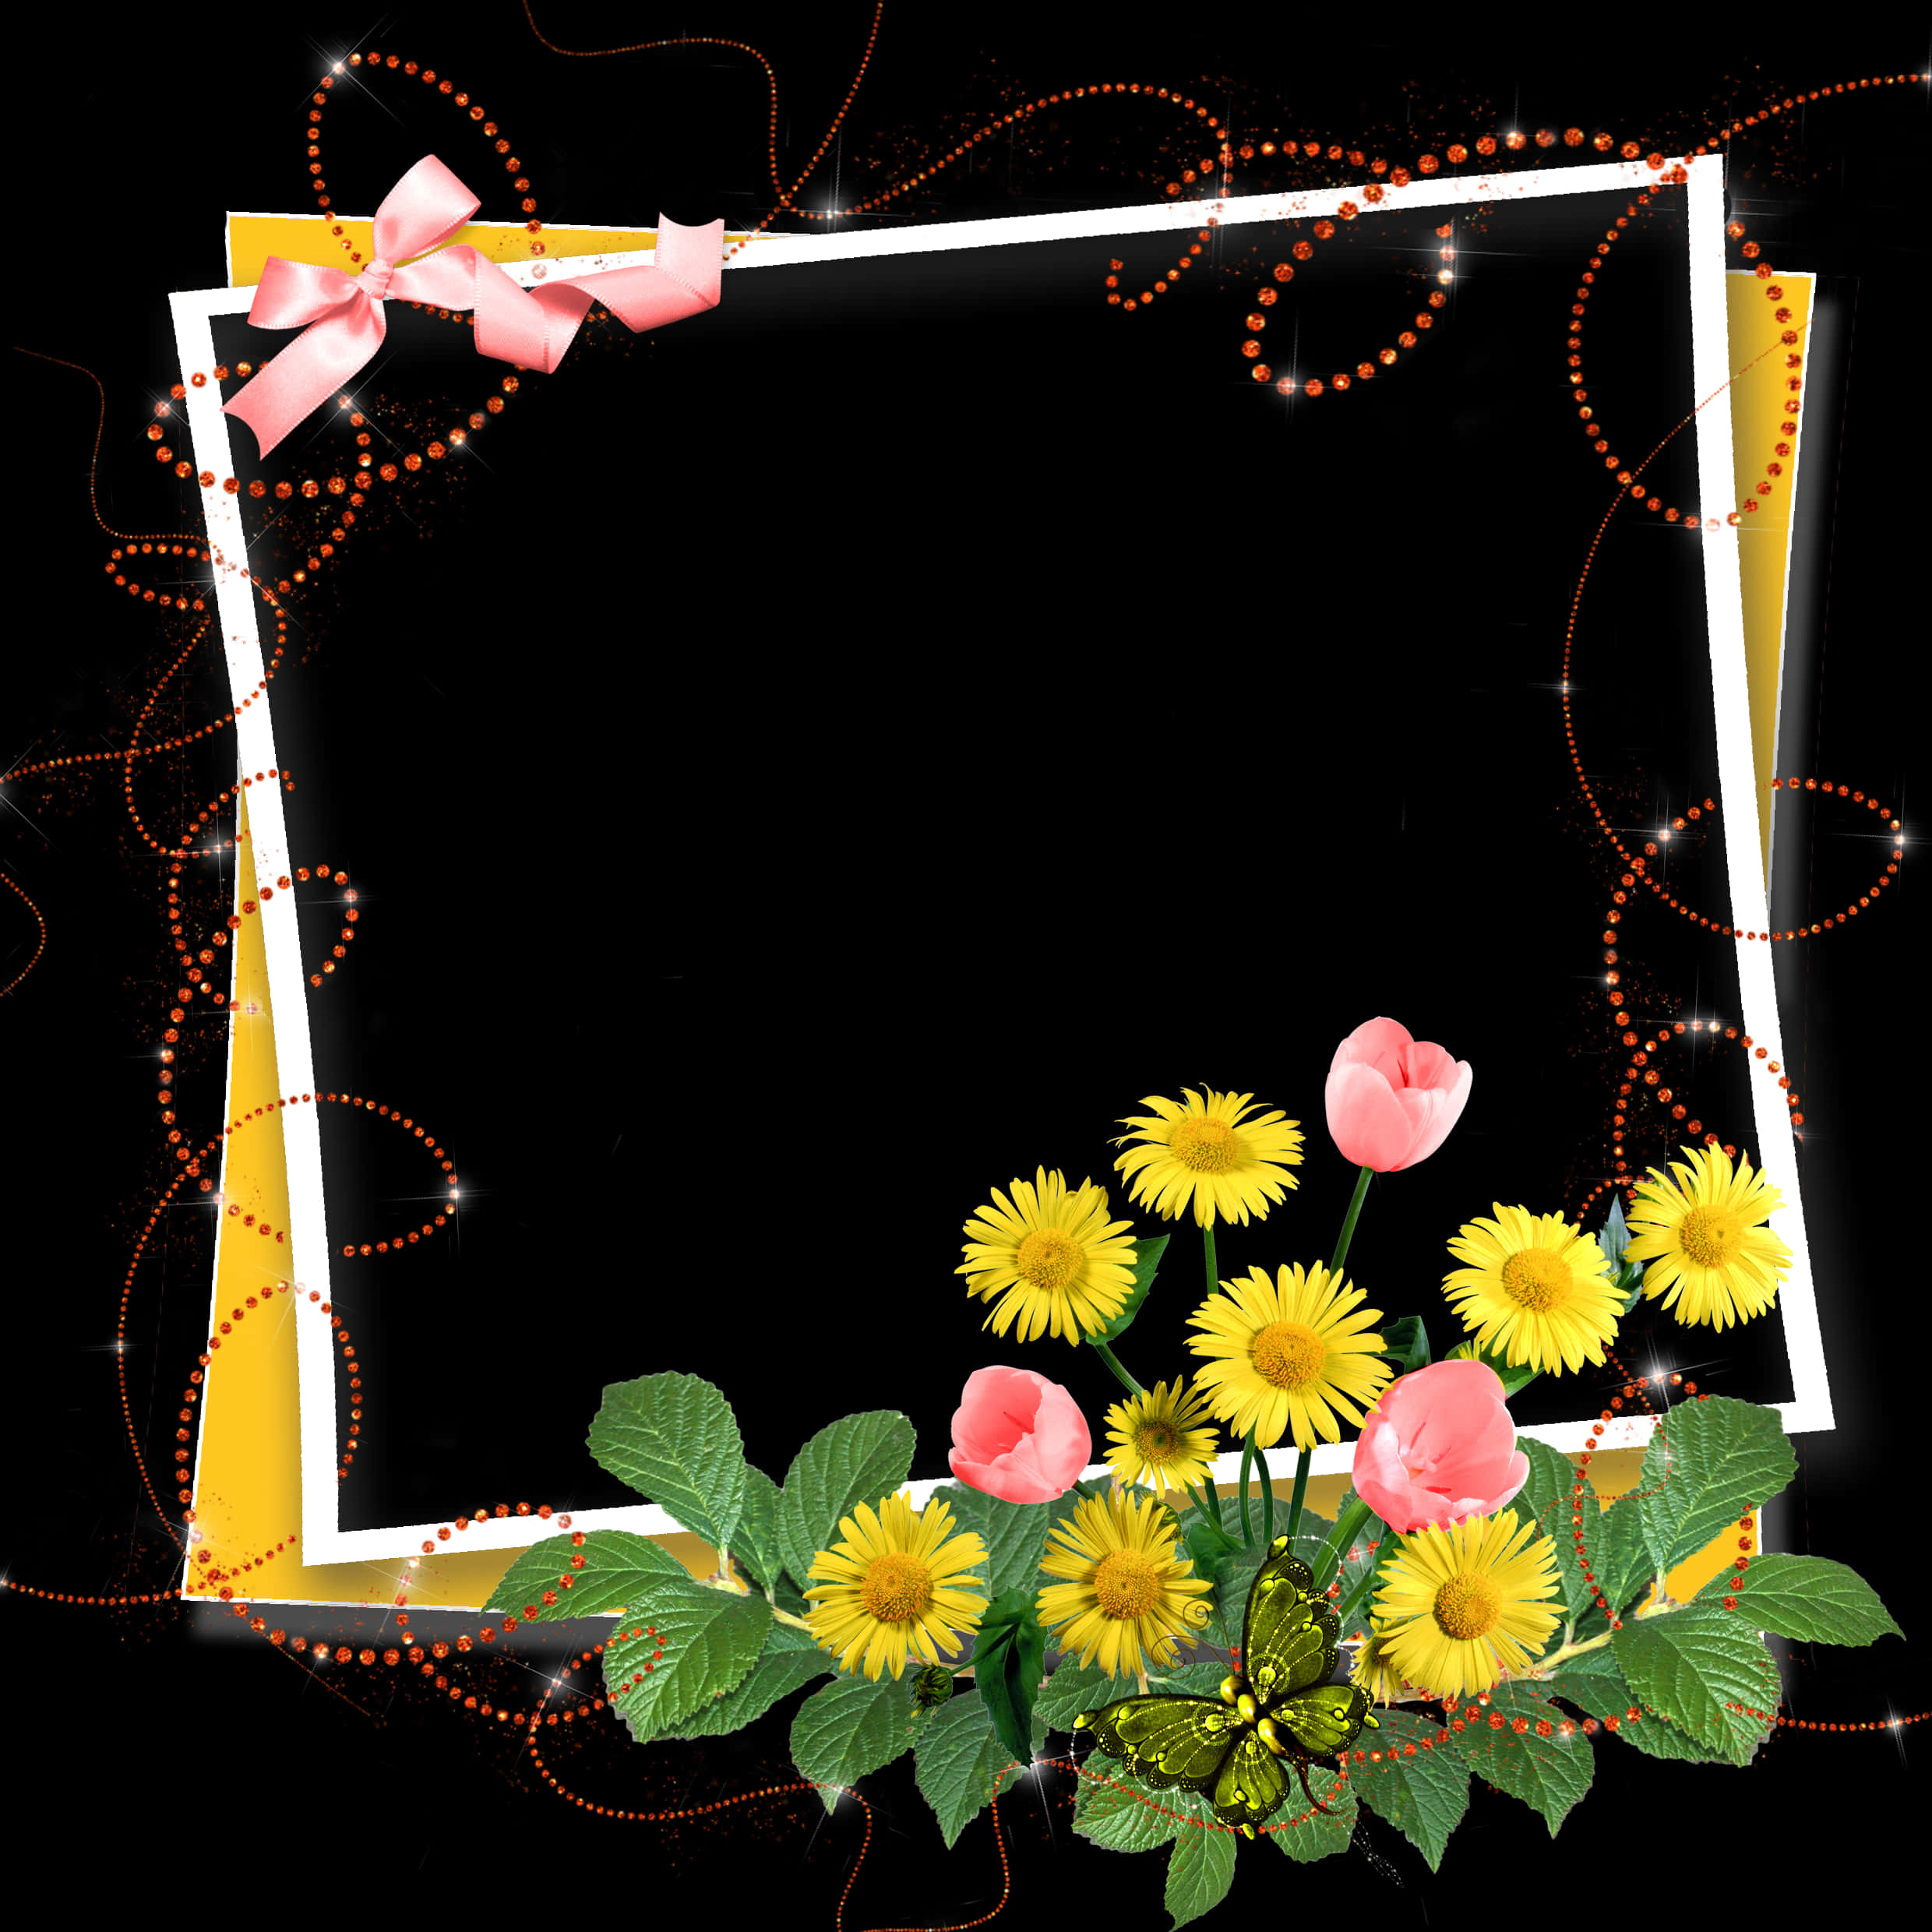 A Frame With Flowers And Leaves